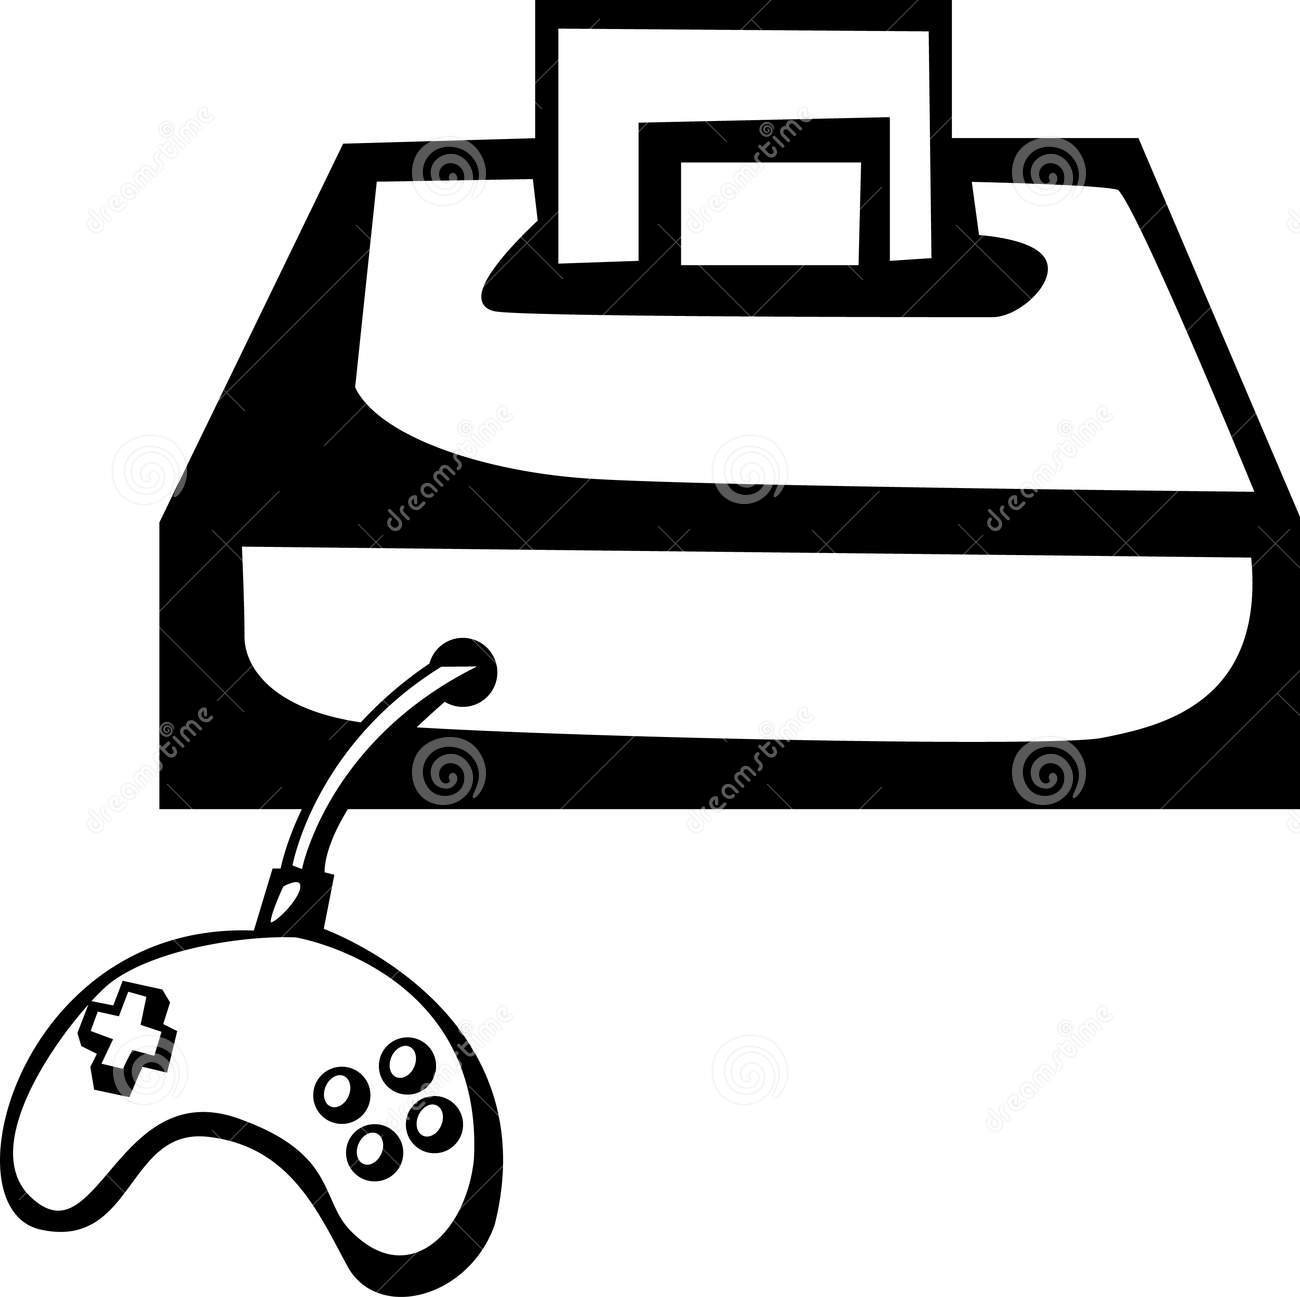 gaming clipart black and white